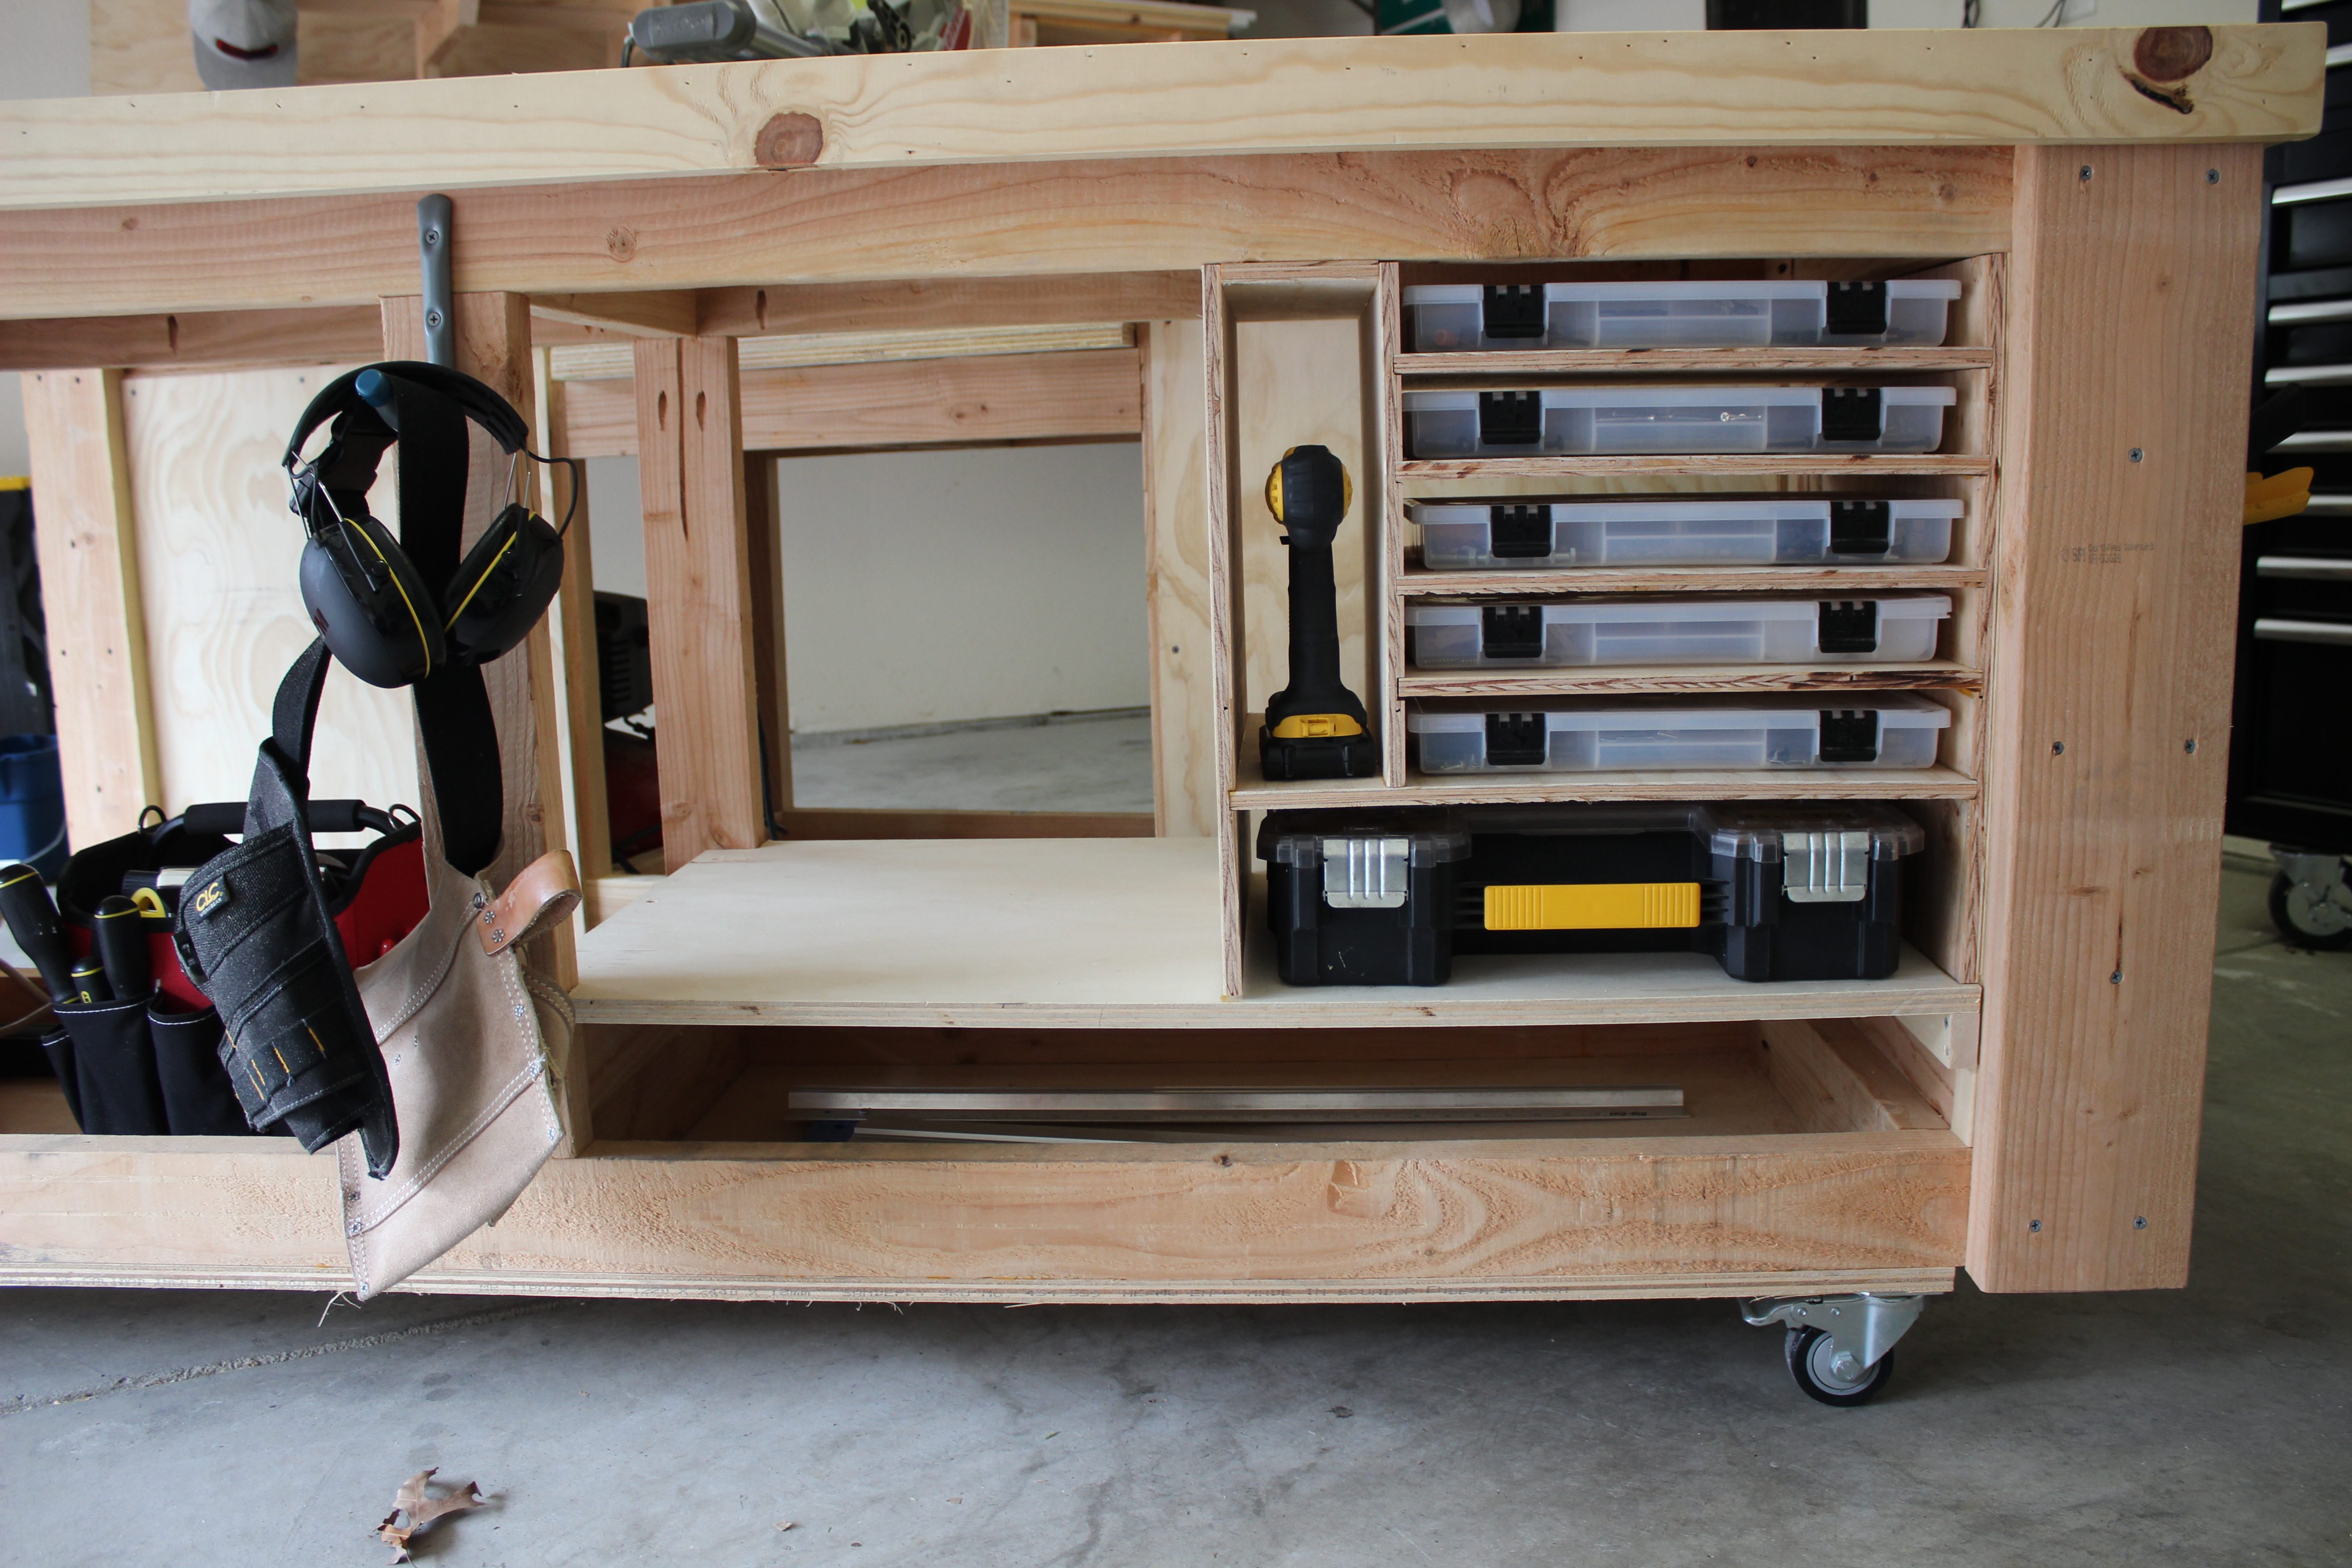 extra storage for screws and tools made out of plywood shelves